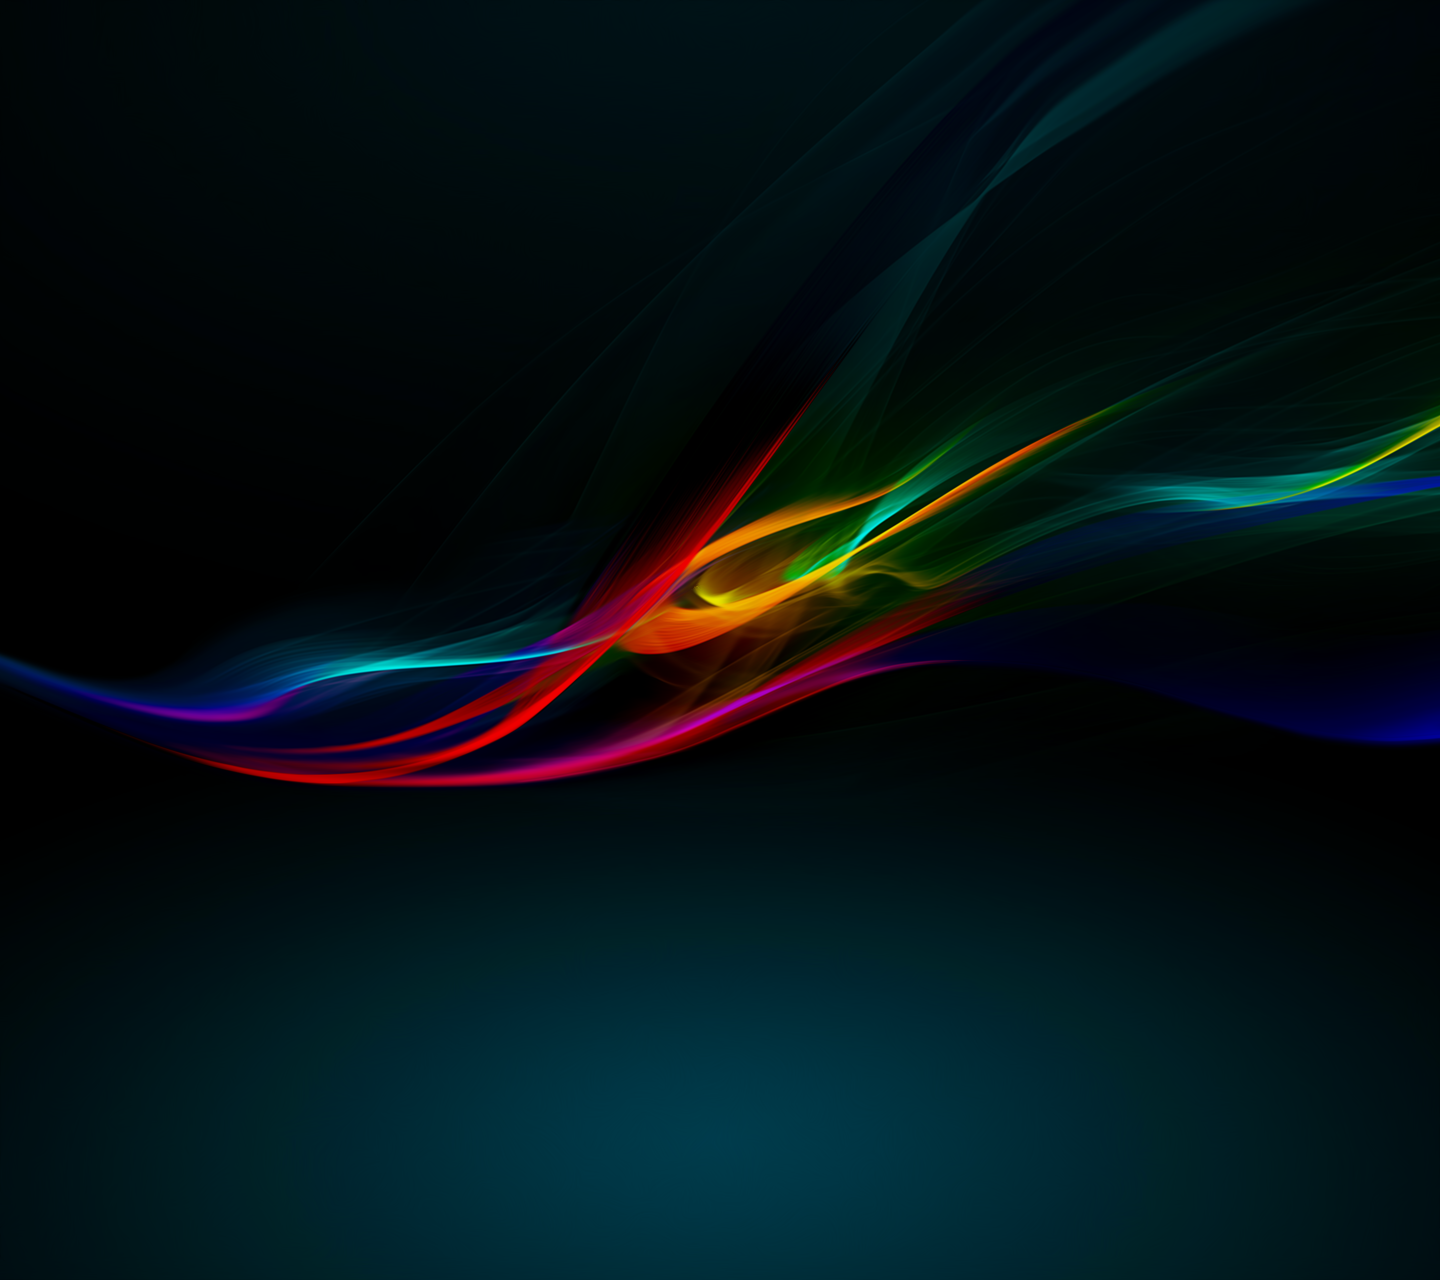 sony xperia wallpapers hd,blue,light,electric blue,line,graphic design